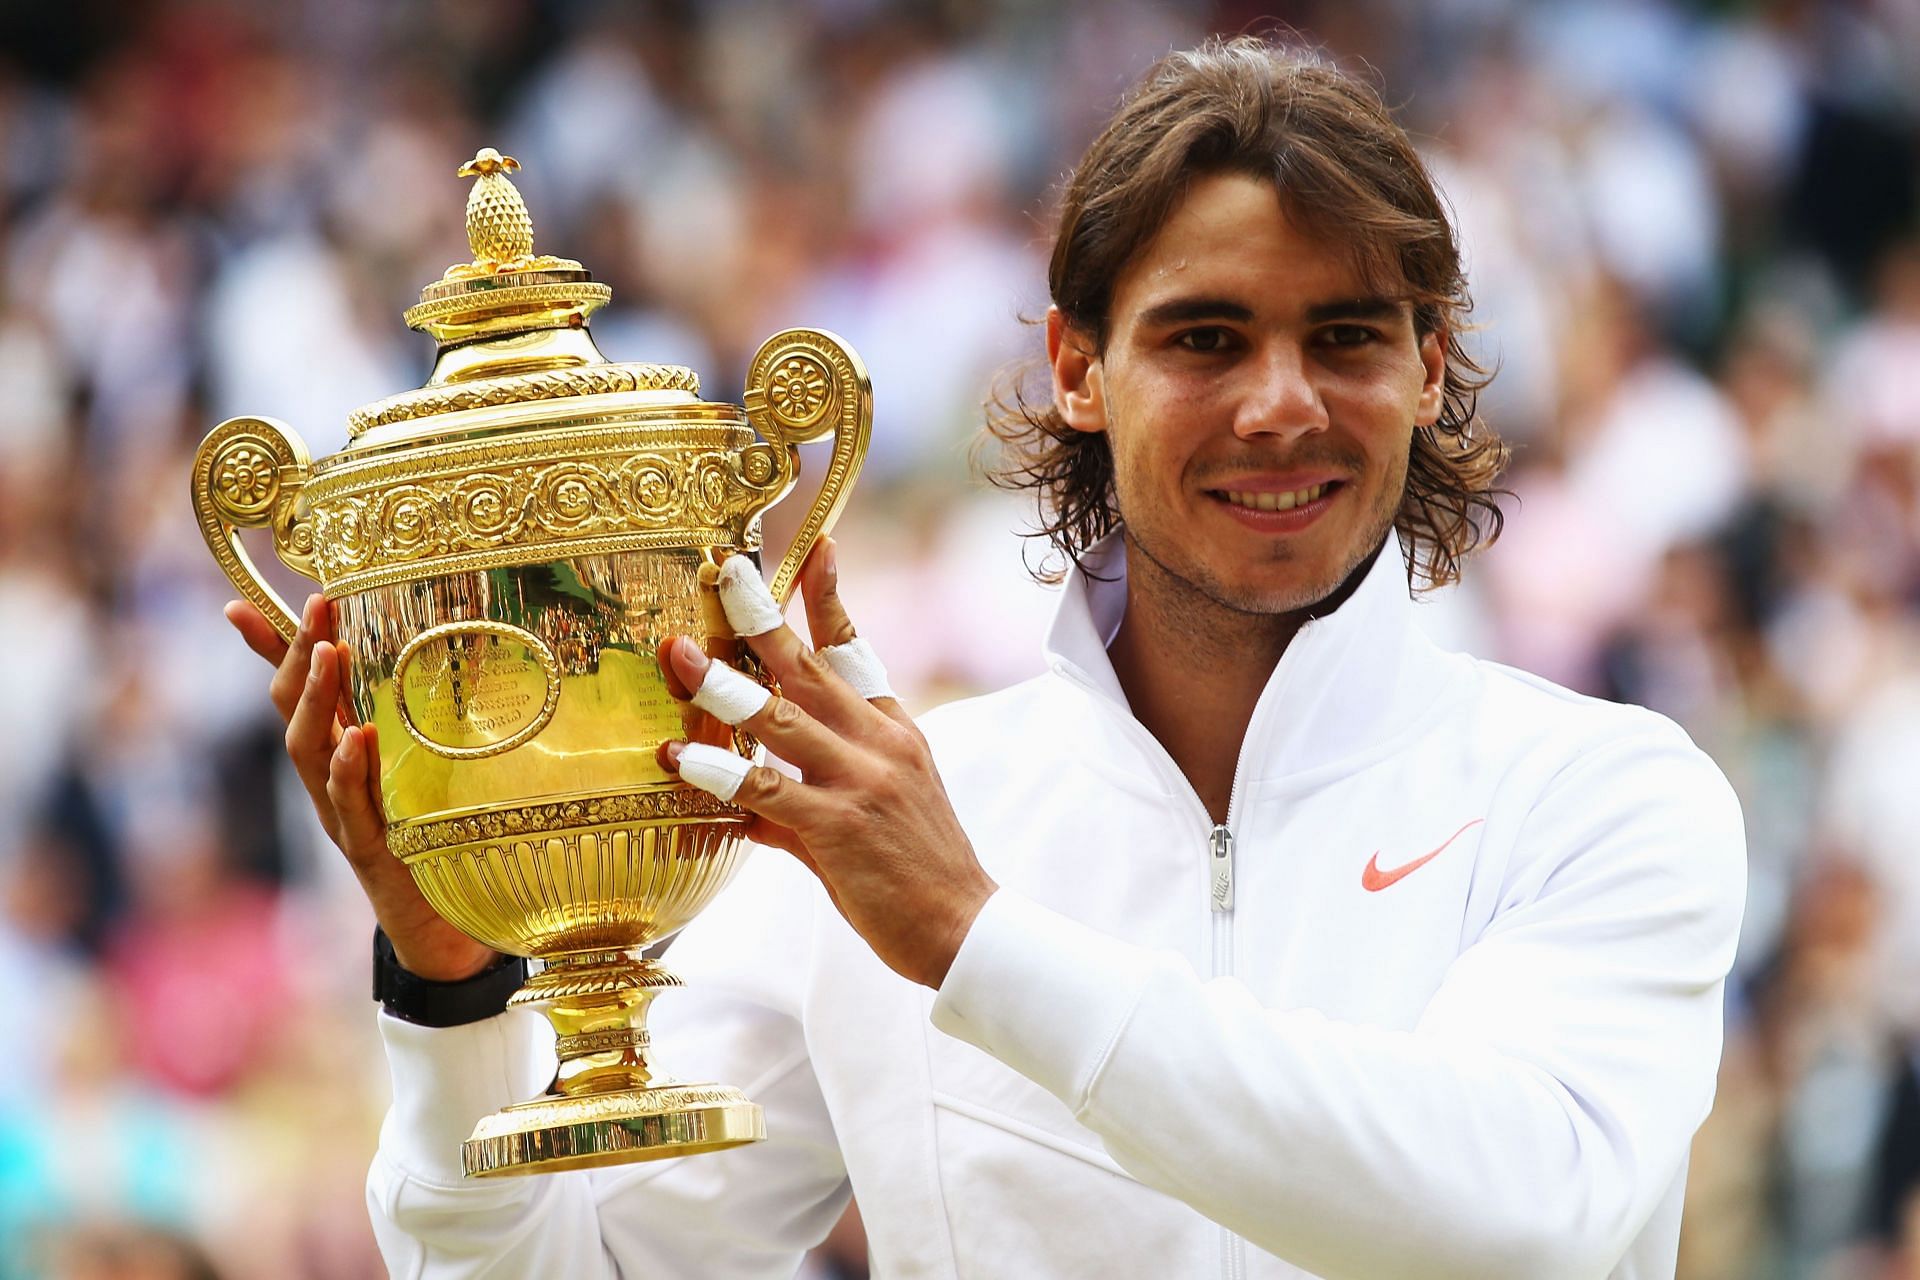 Rafael Nadal pictured with his Wimbledon 2010 trophy